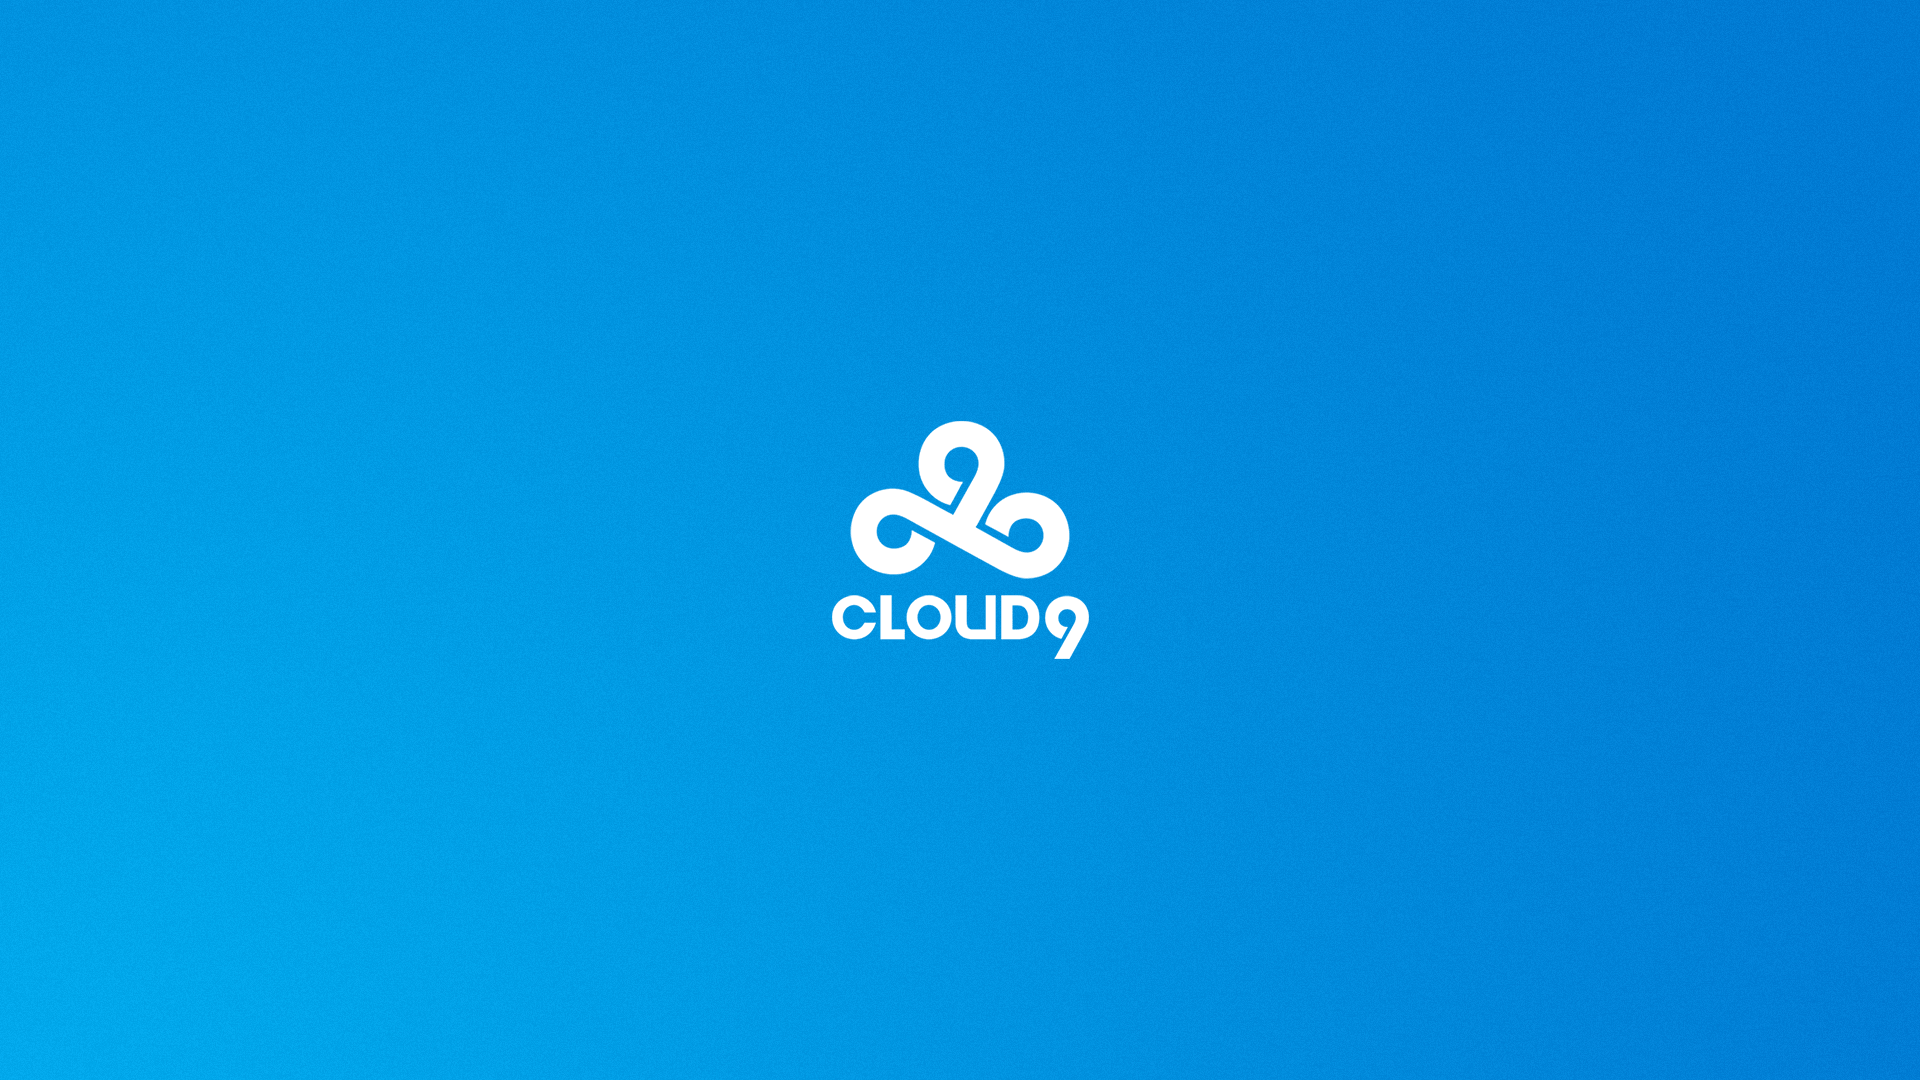 Cloud 9 Wallpapers Top Free Cloud 9 Backgrounds Wallpaperaccess